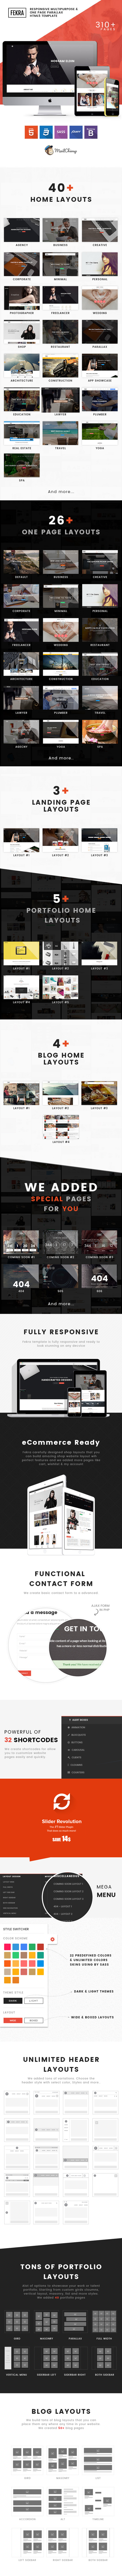 Fekra - Responsive One/Multi Page HTML5 Template - 10